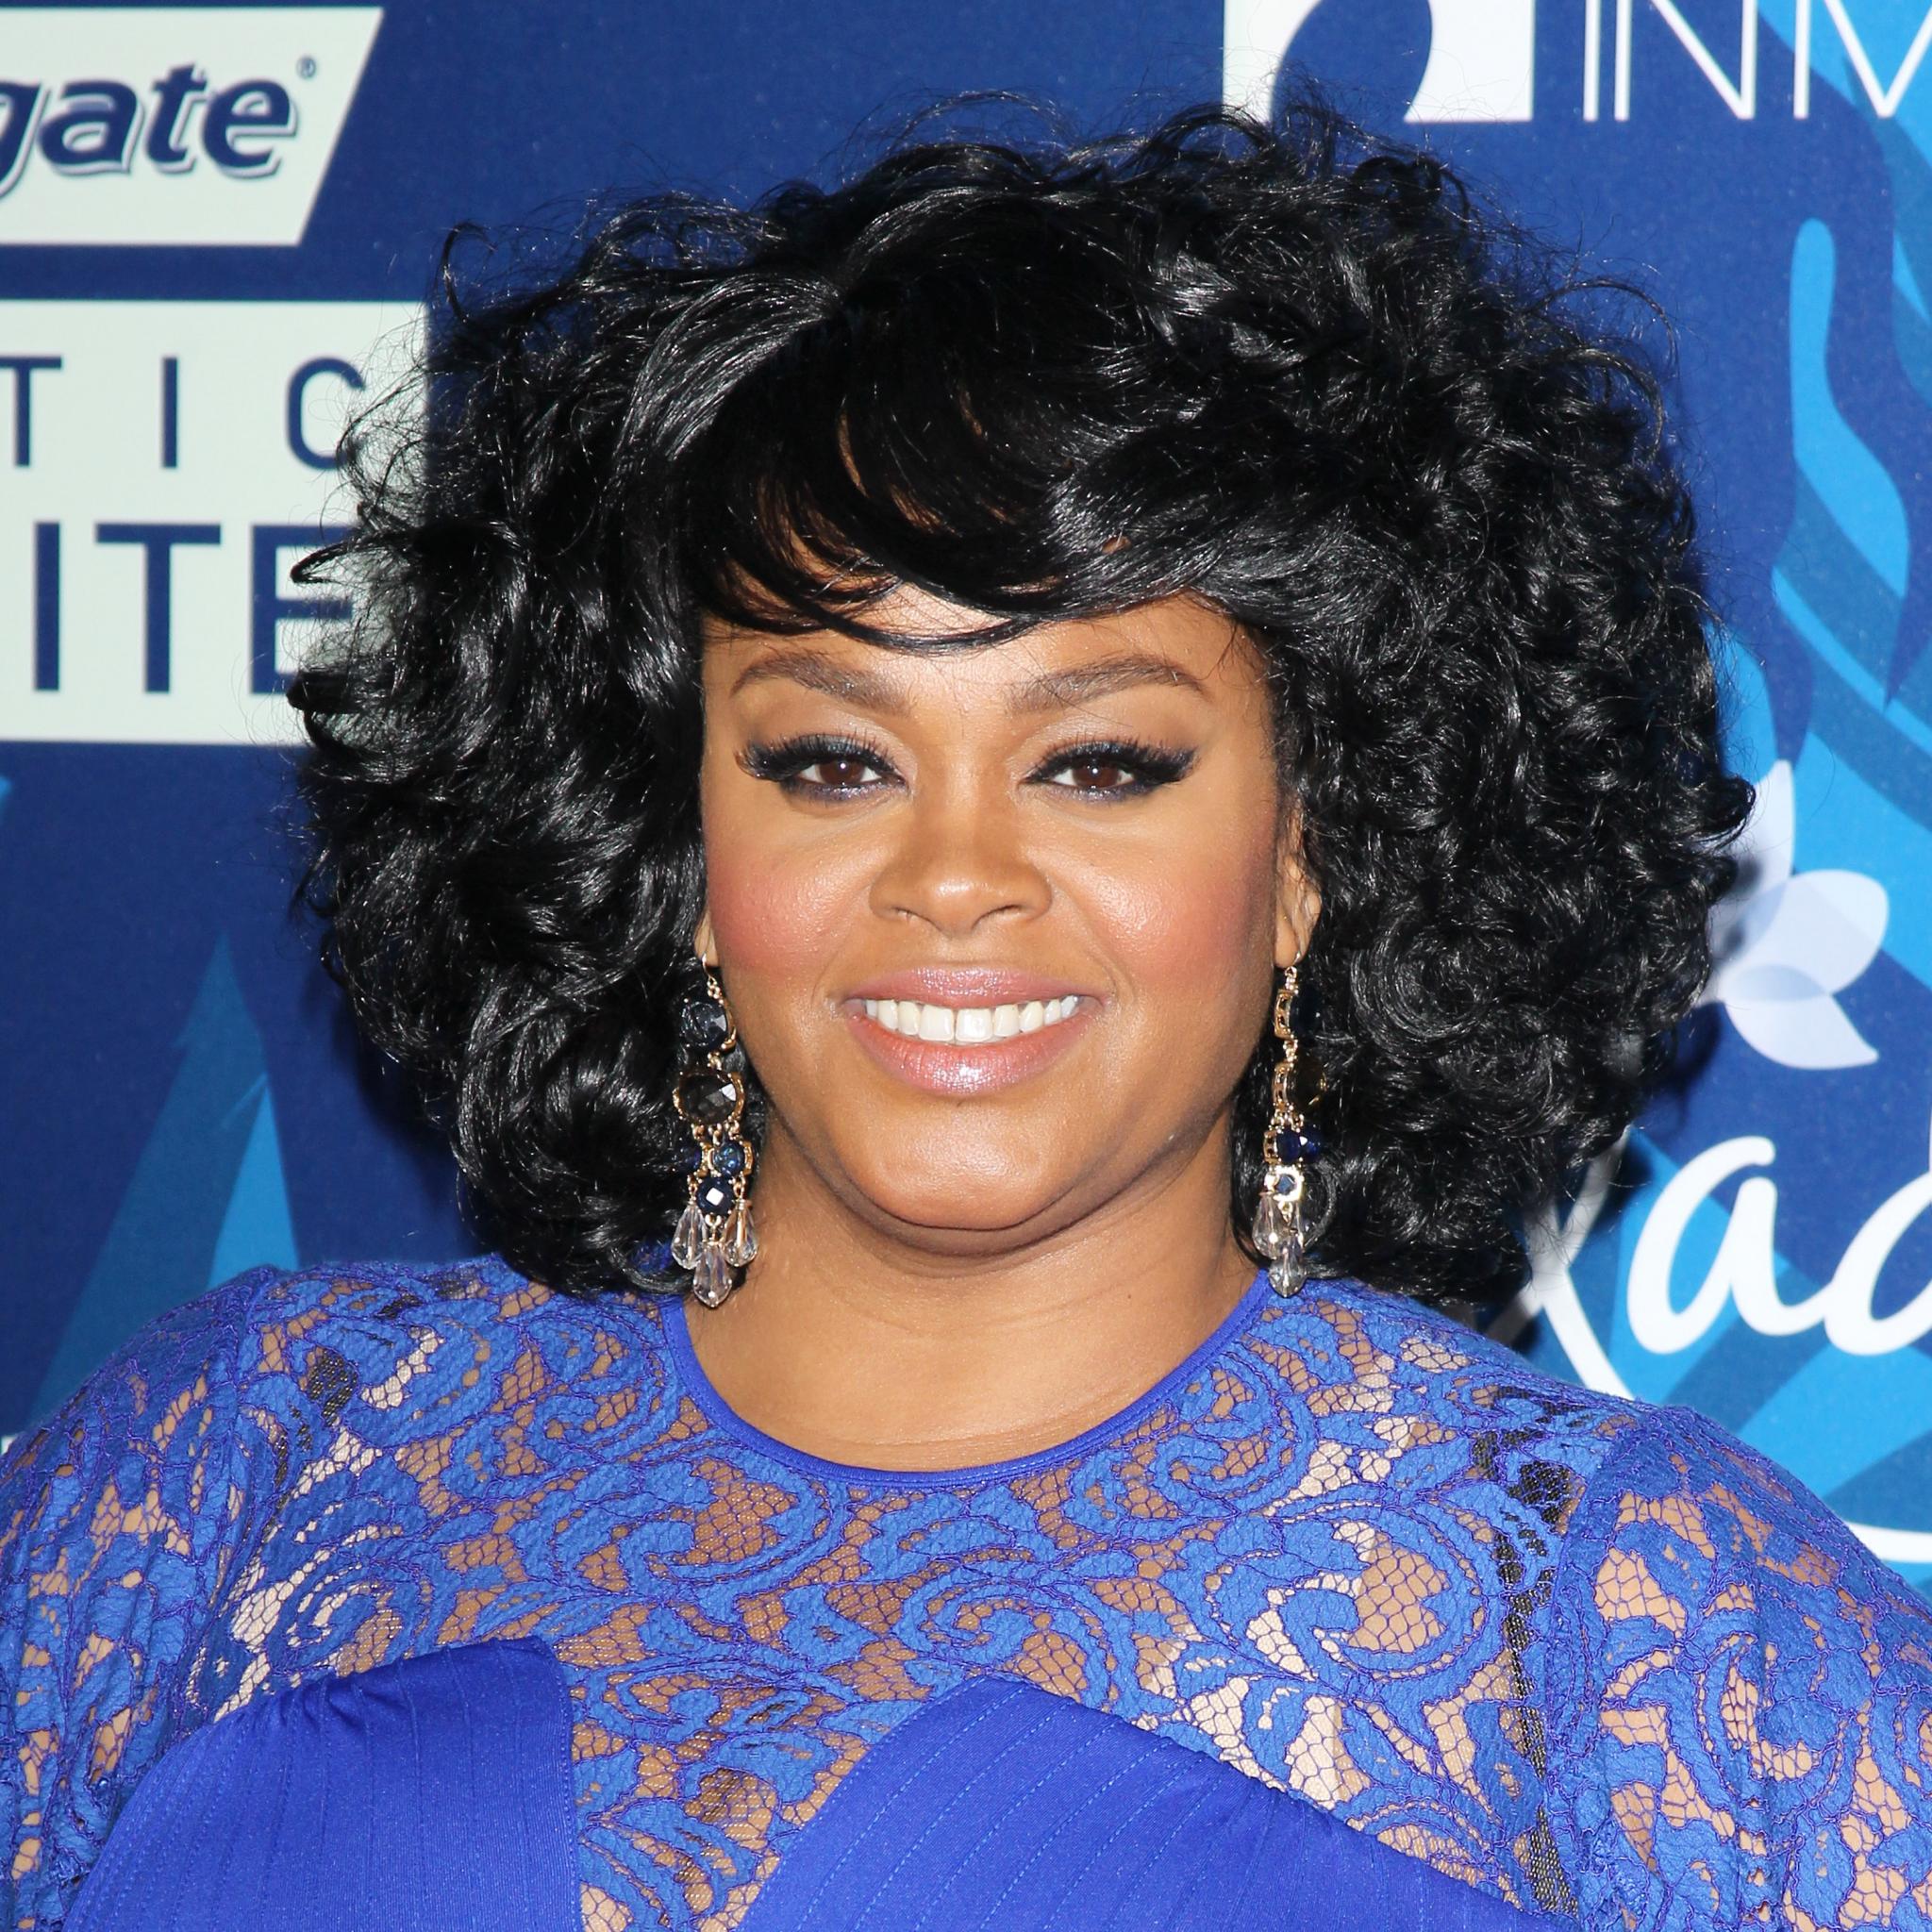 WATCH: Jill Scott’s Video for New Song, ‘You Don’t Know’